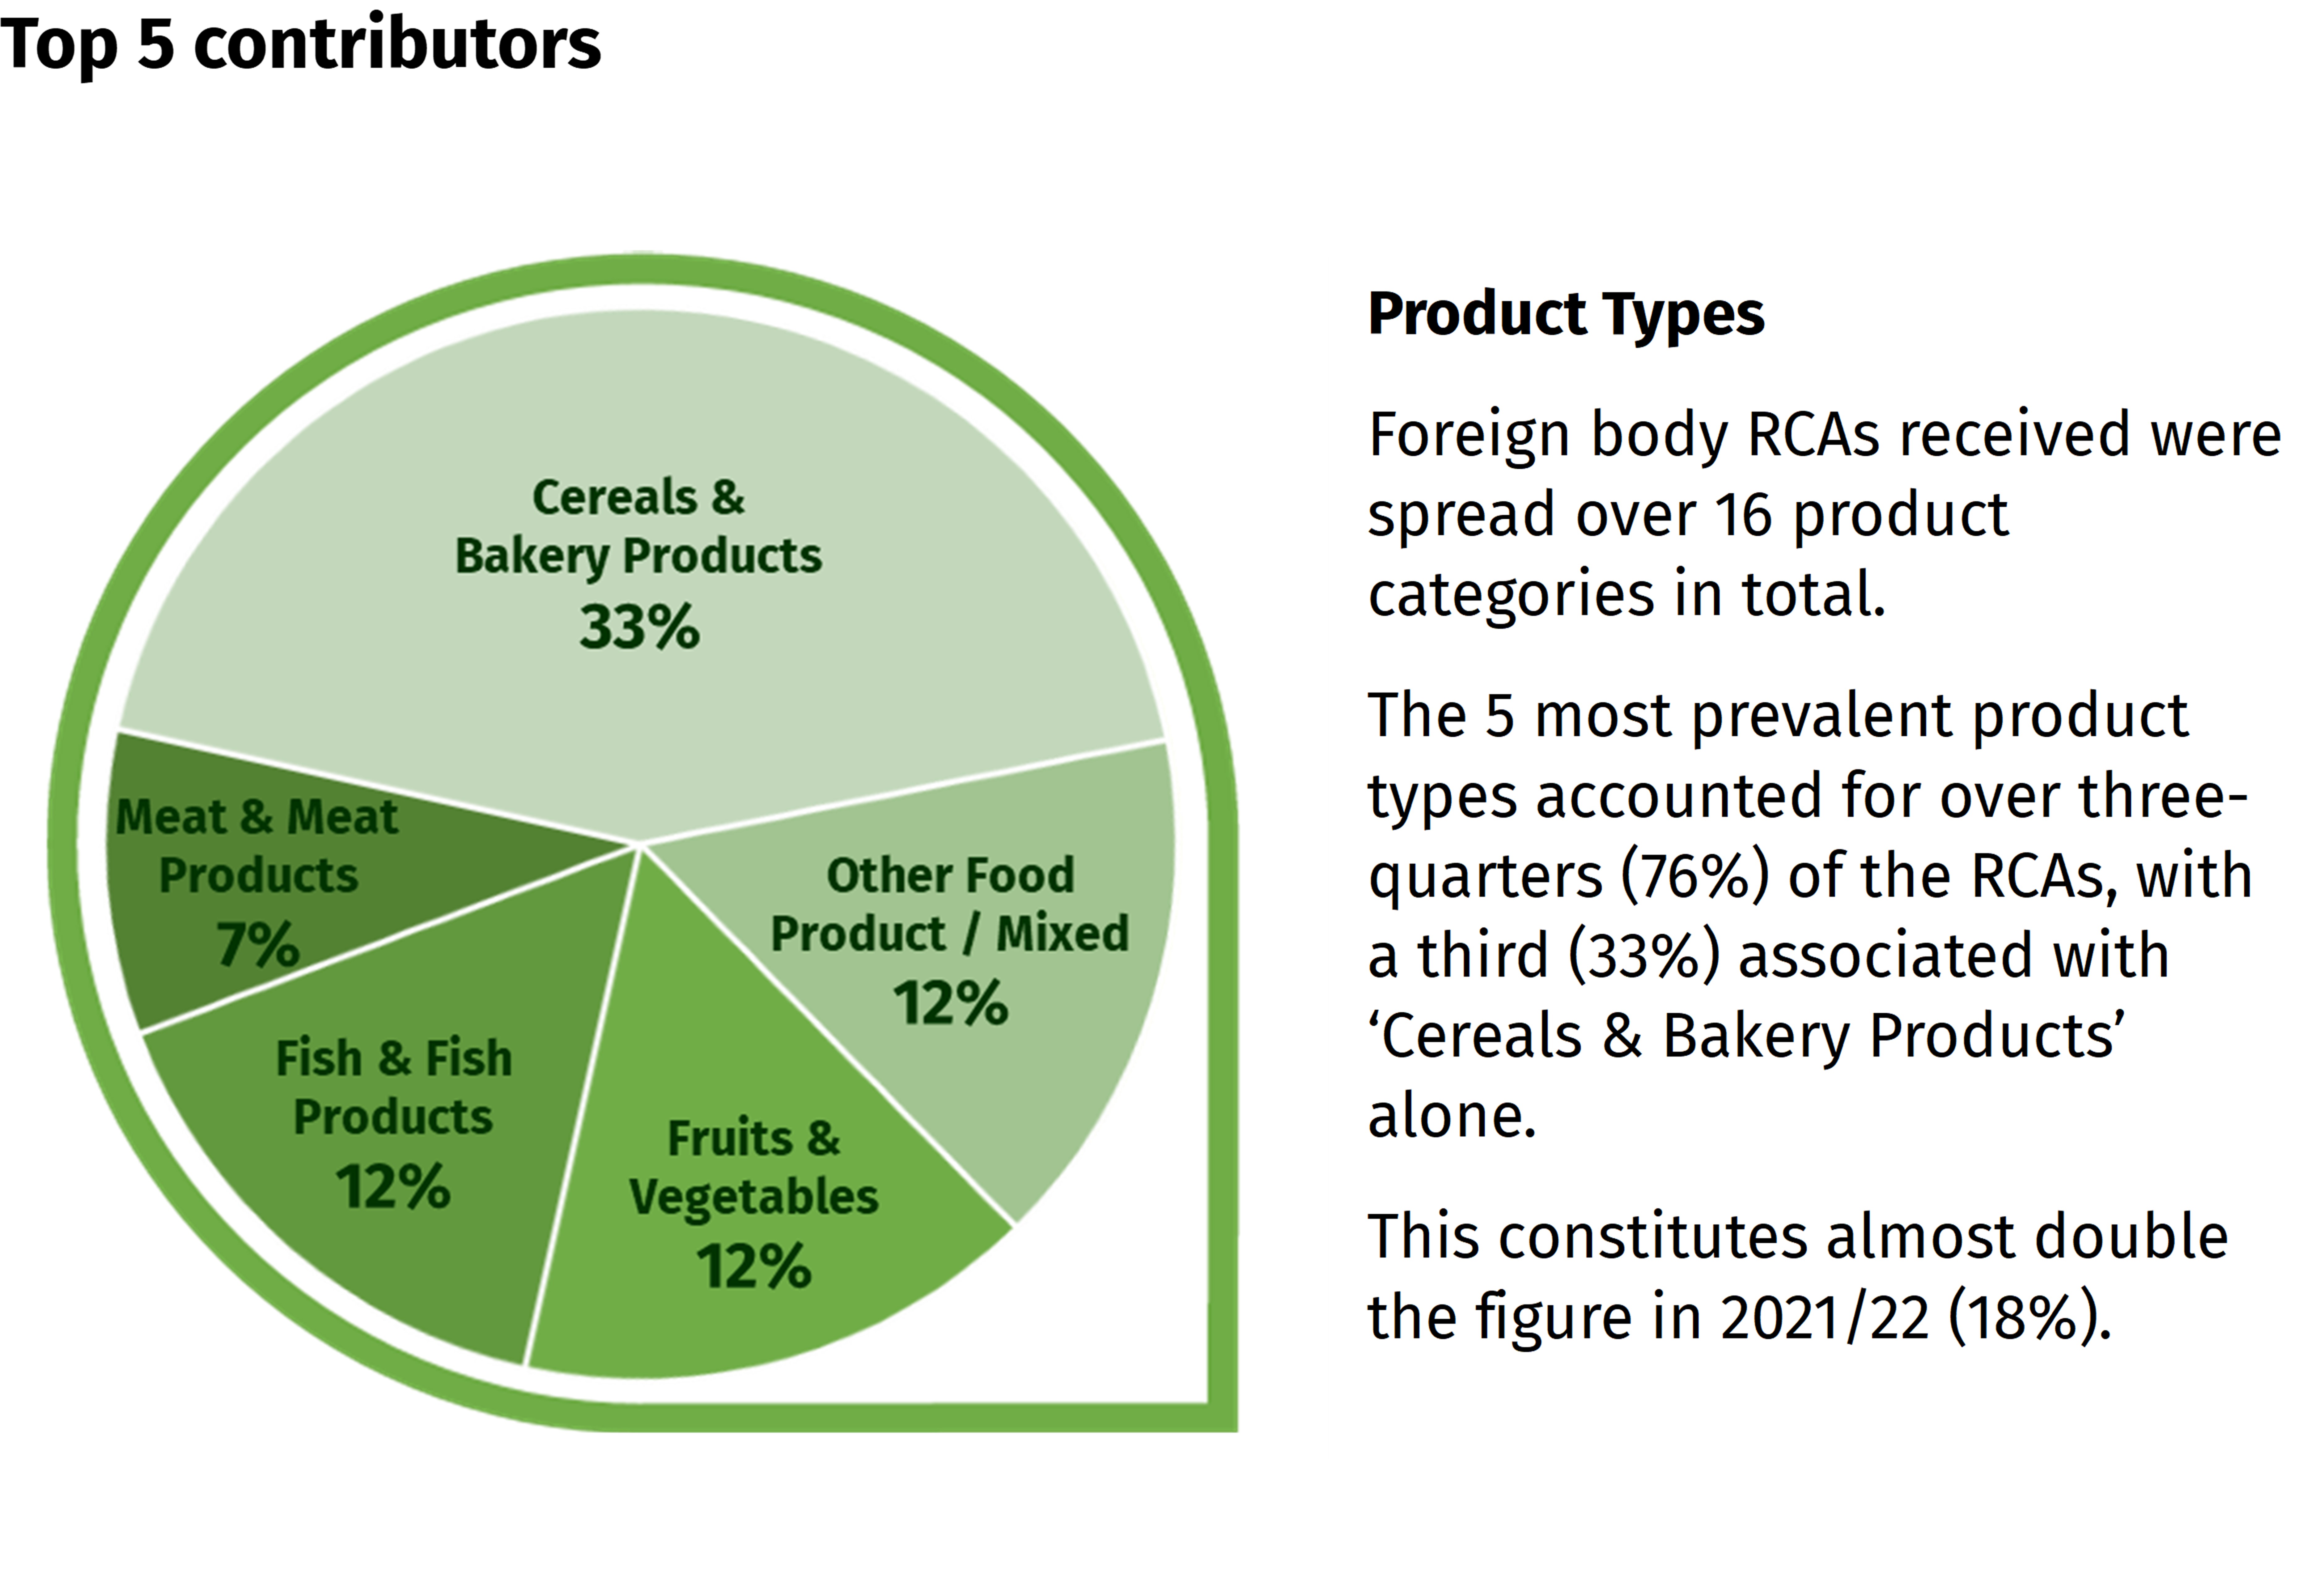 33% cereals and bakery products, 12% other food product/mixed, 12% fruits and vegetables, 12% fish and fish products, 7% meat and meat products. 